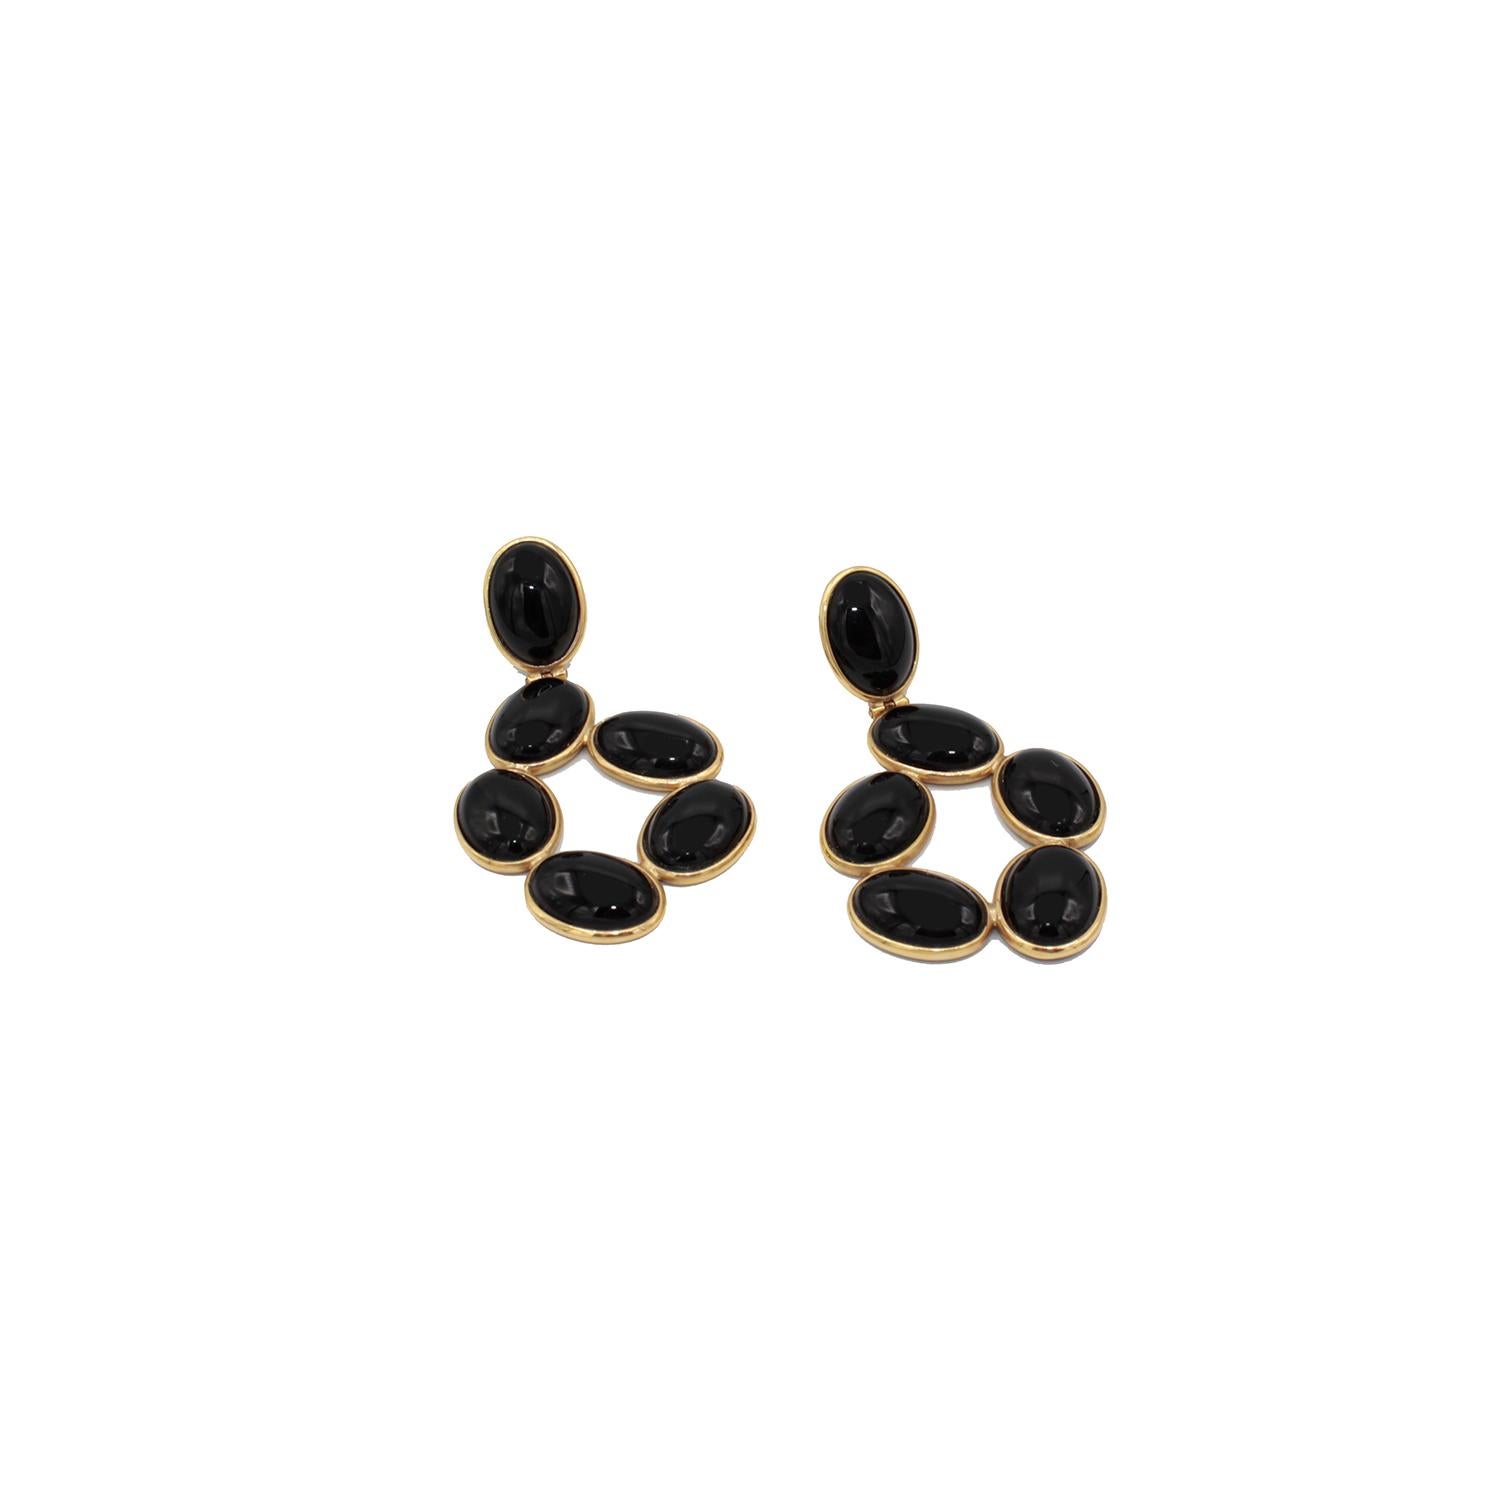 Fashion earrings in 18kt yellow gold and black agate cabochons. 
Pierce and post system. 
n. 12 small black agate oval cabochons ct. 52
Yellow Gold g. 6


